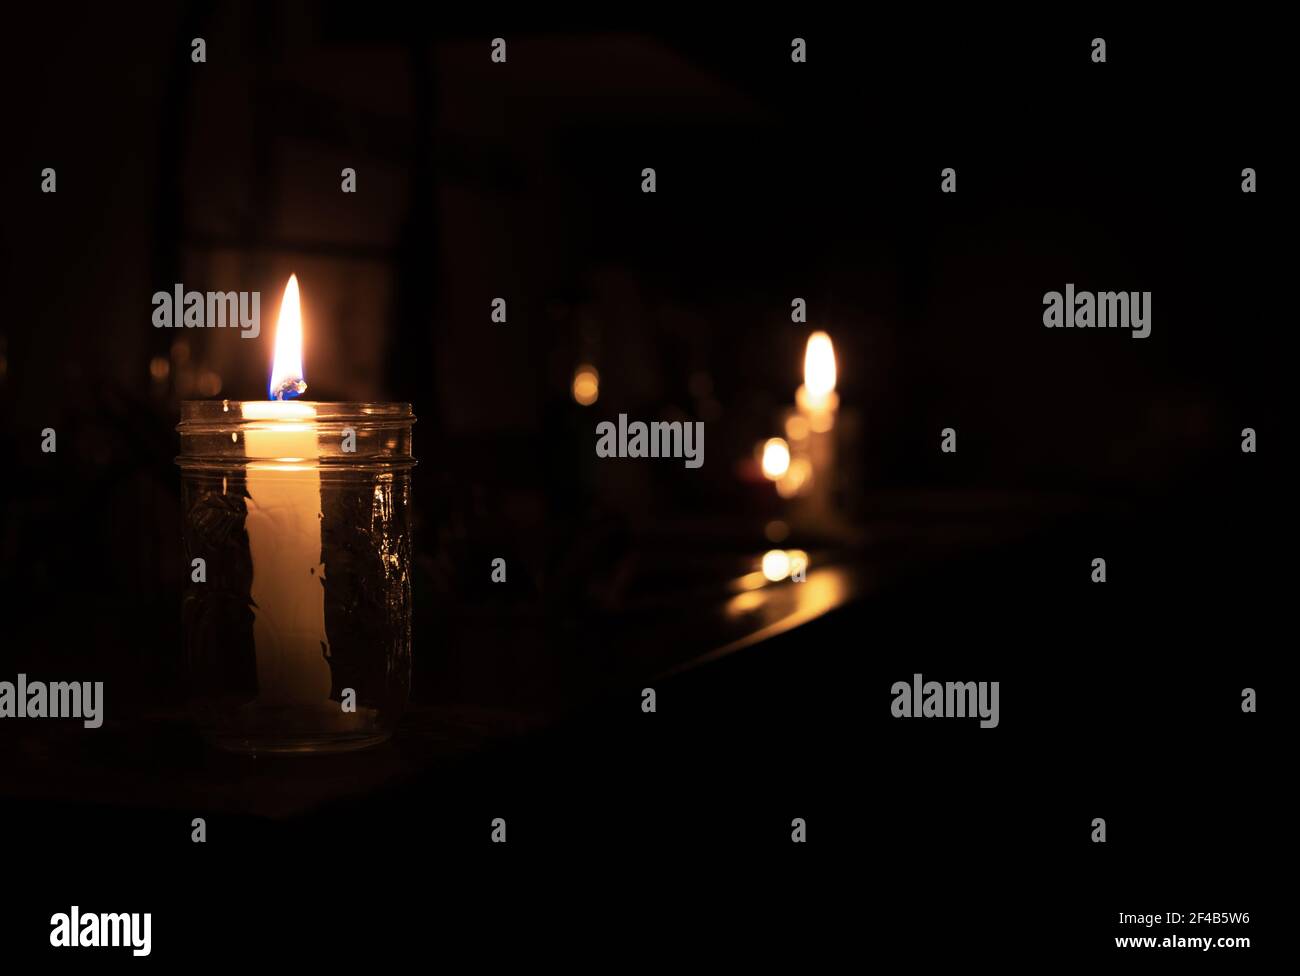 https://c8.alamy.com/comp/2F4B5W6/candles-on-kitchen-counter-during-power-outage-2-candles-are-inside-a-mason-jar-pitch-black-room-except-the-candle-lights-selective-focus-on-first-2F4B5W6.jpg